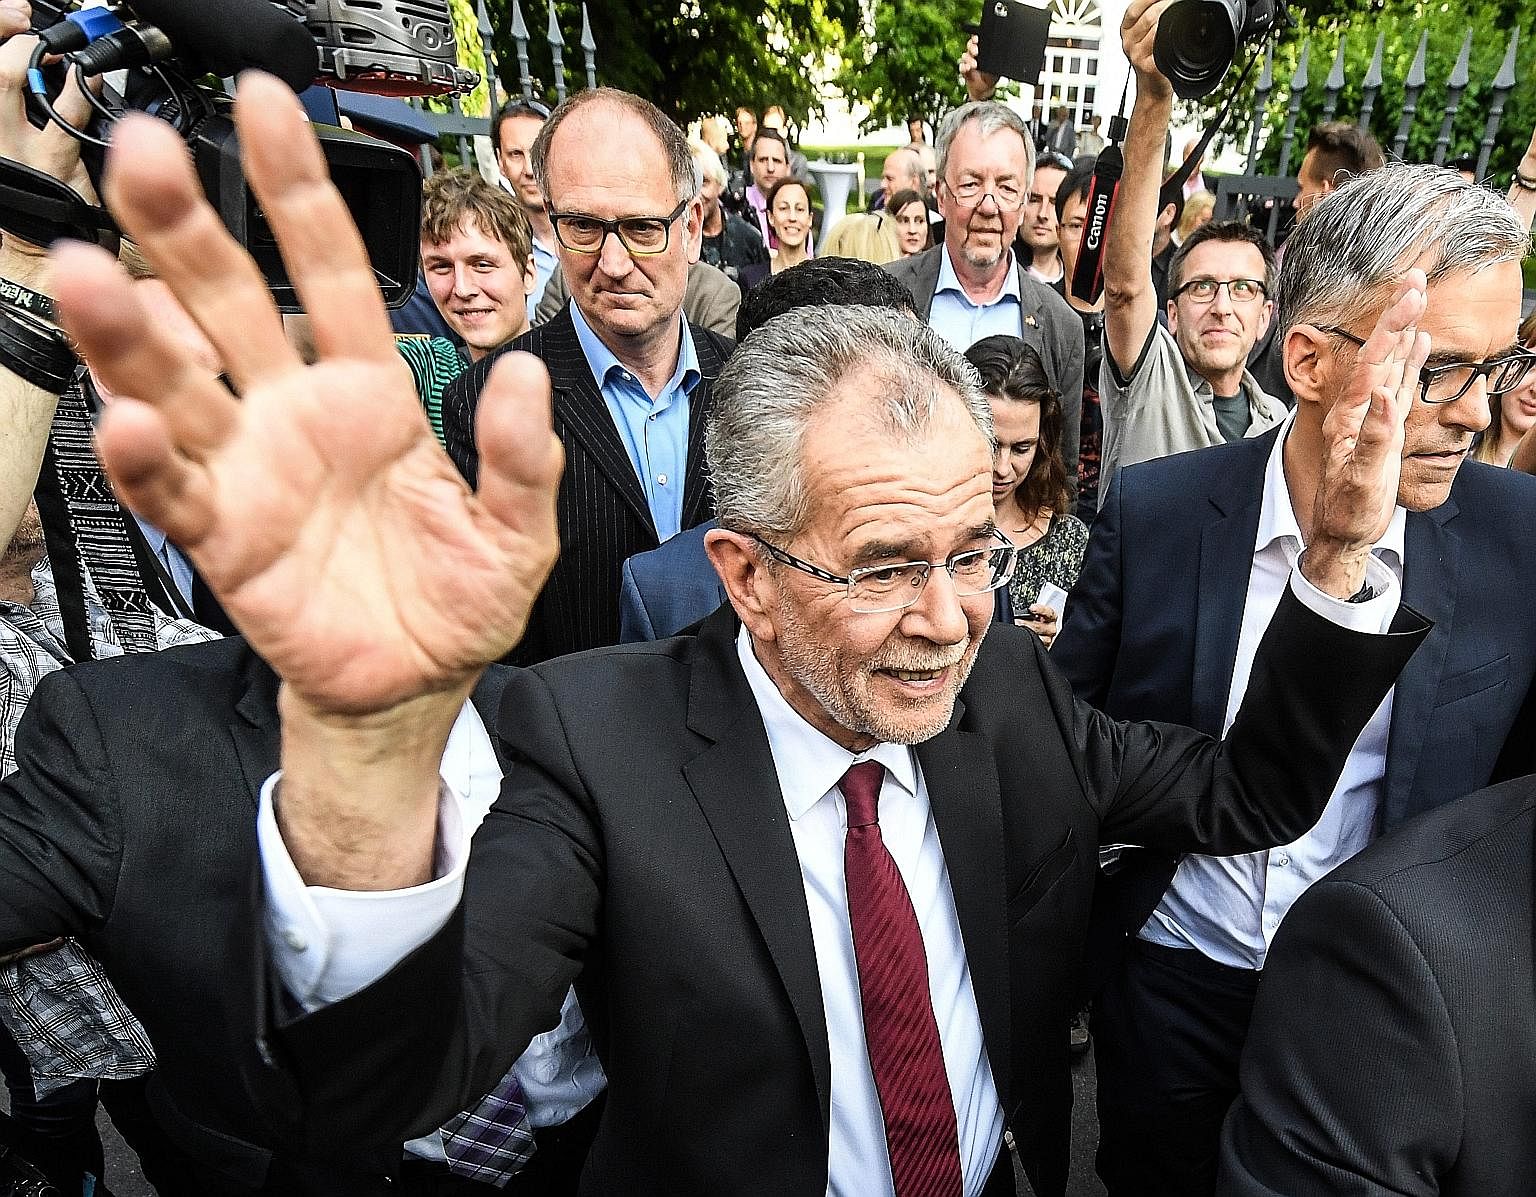 Austrian President-elect Alexander Van der Bellen, who is supported by the Green Party, waving after delivering a statement on Monday, following the presidential election run-off.